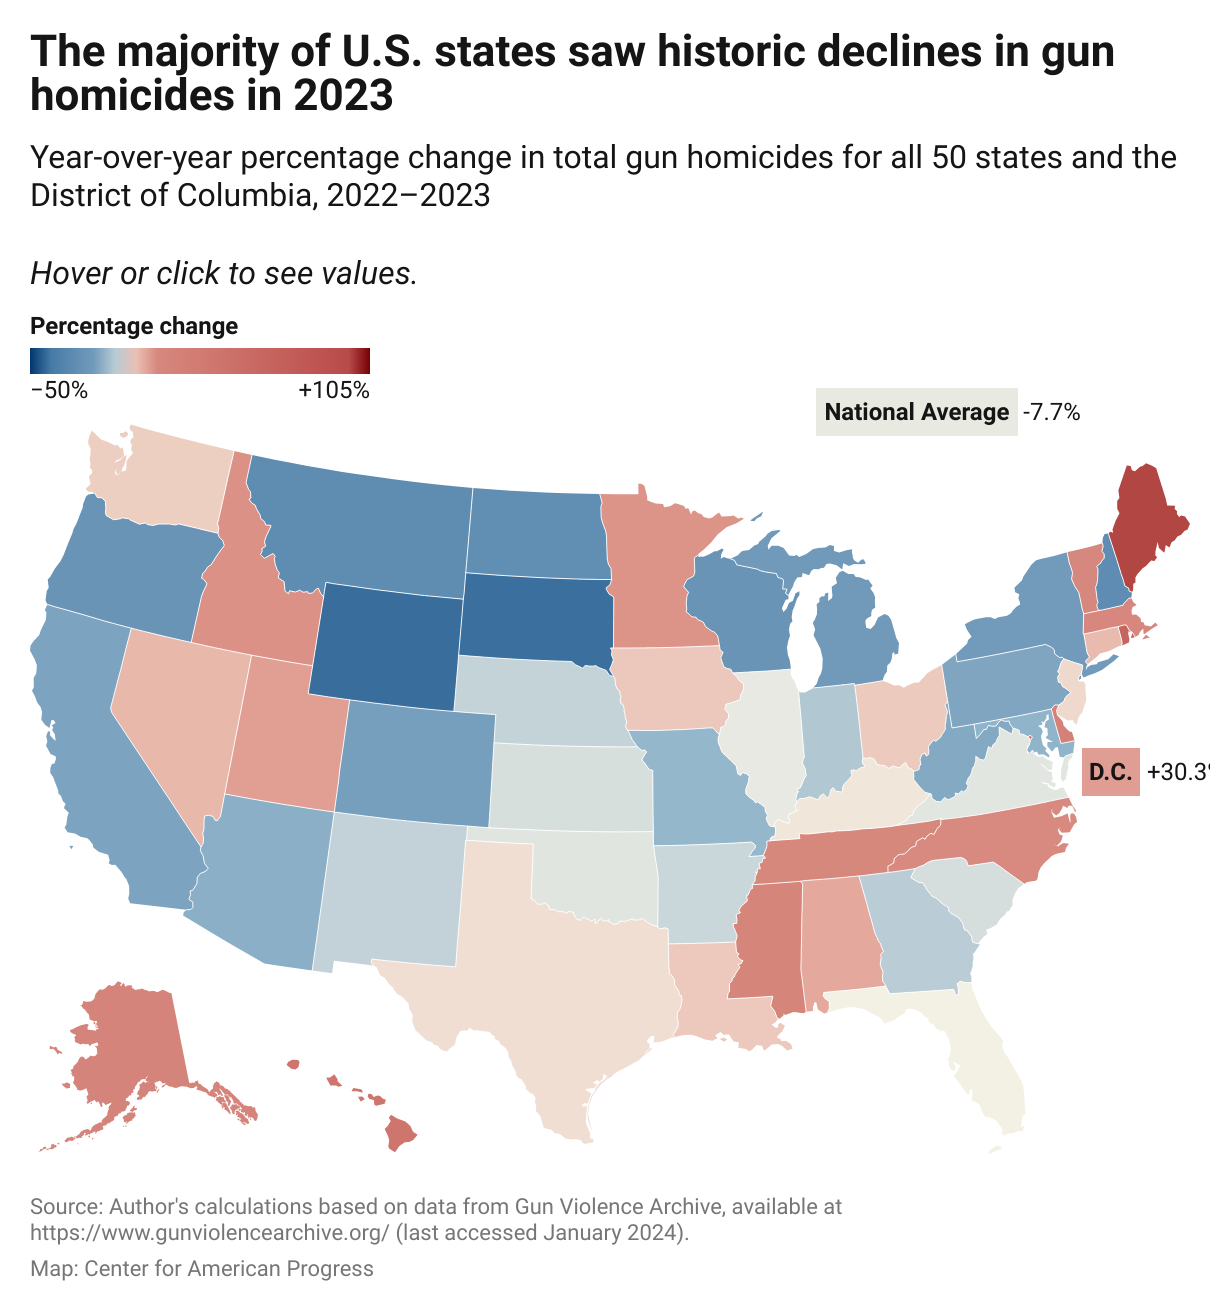 Map of the United States showing that 36 states experienced an overall decline in gun violence homicides from 2022 to 2023, and only six states and the District of Columbia experienced a rise in gun violence homicides year to year.